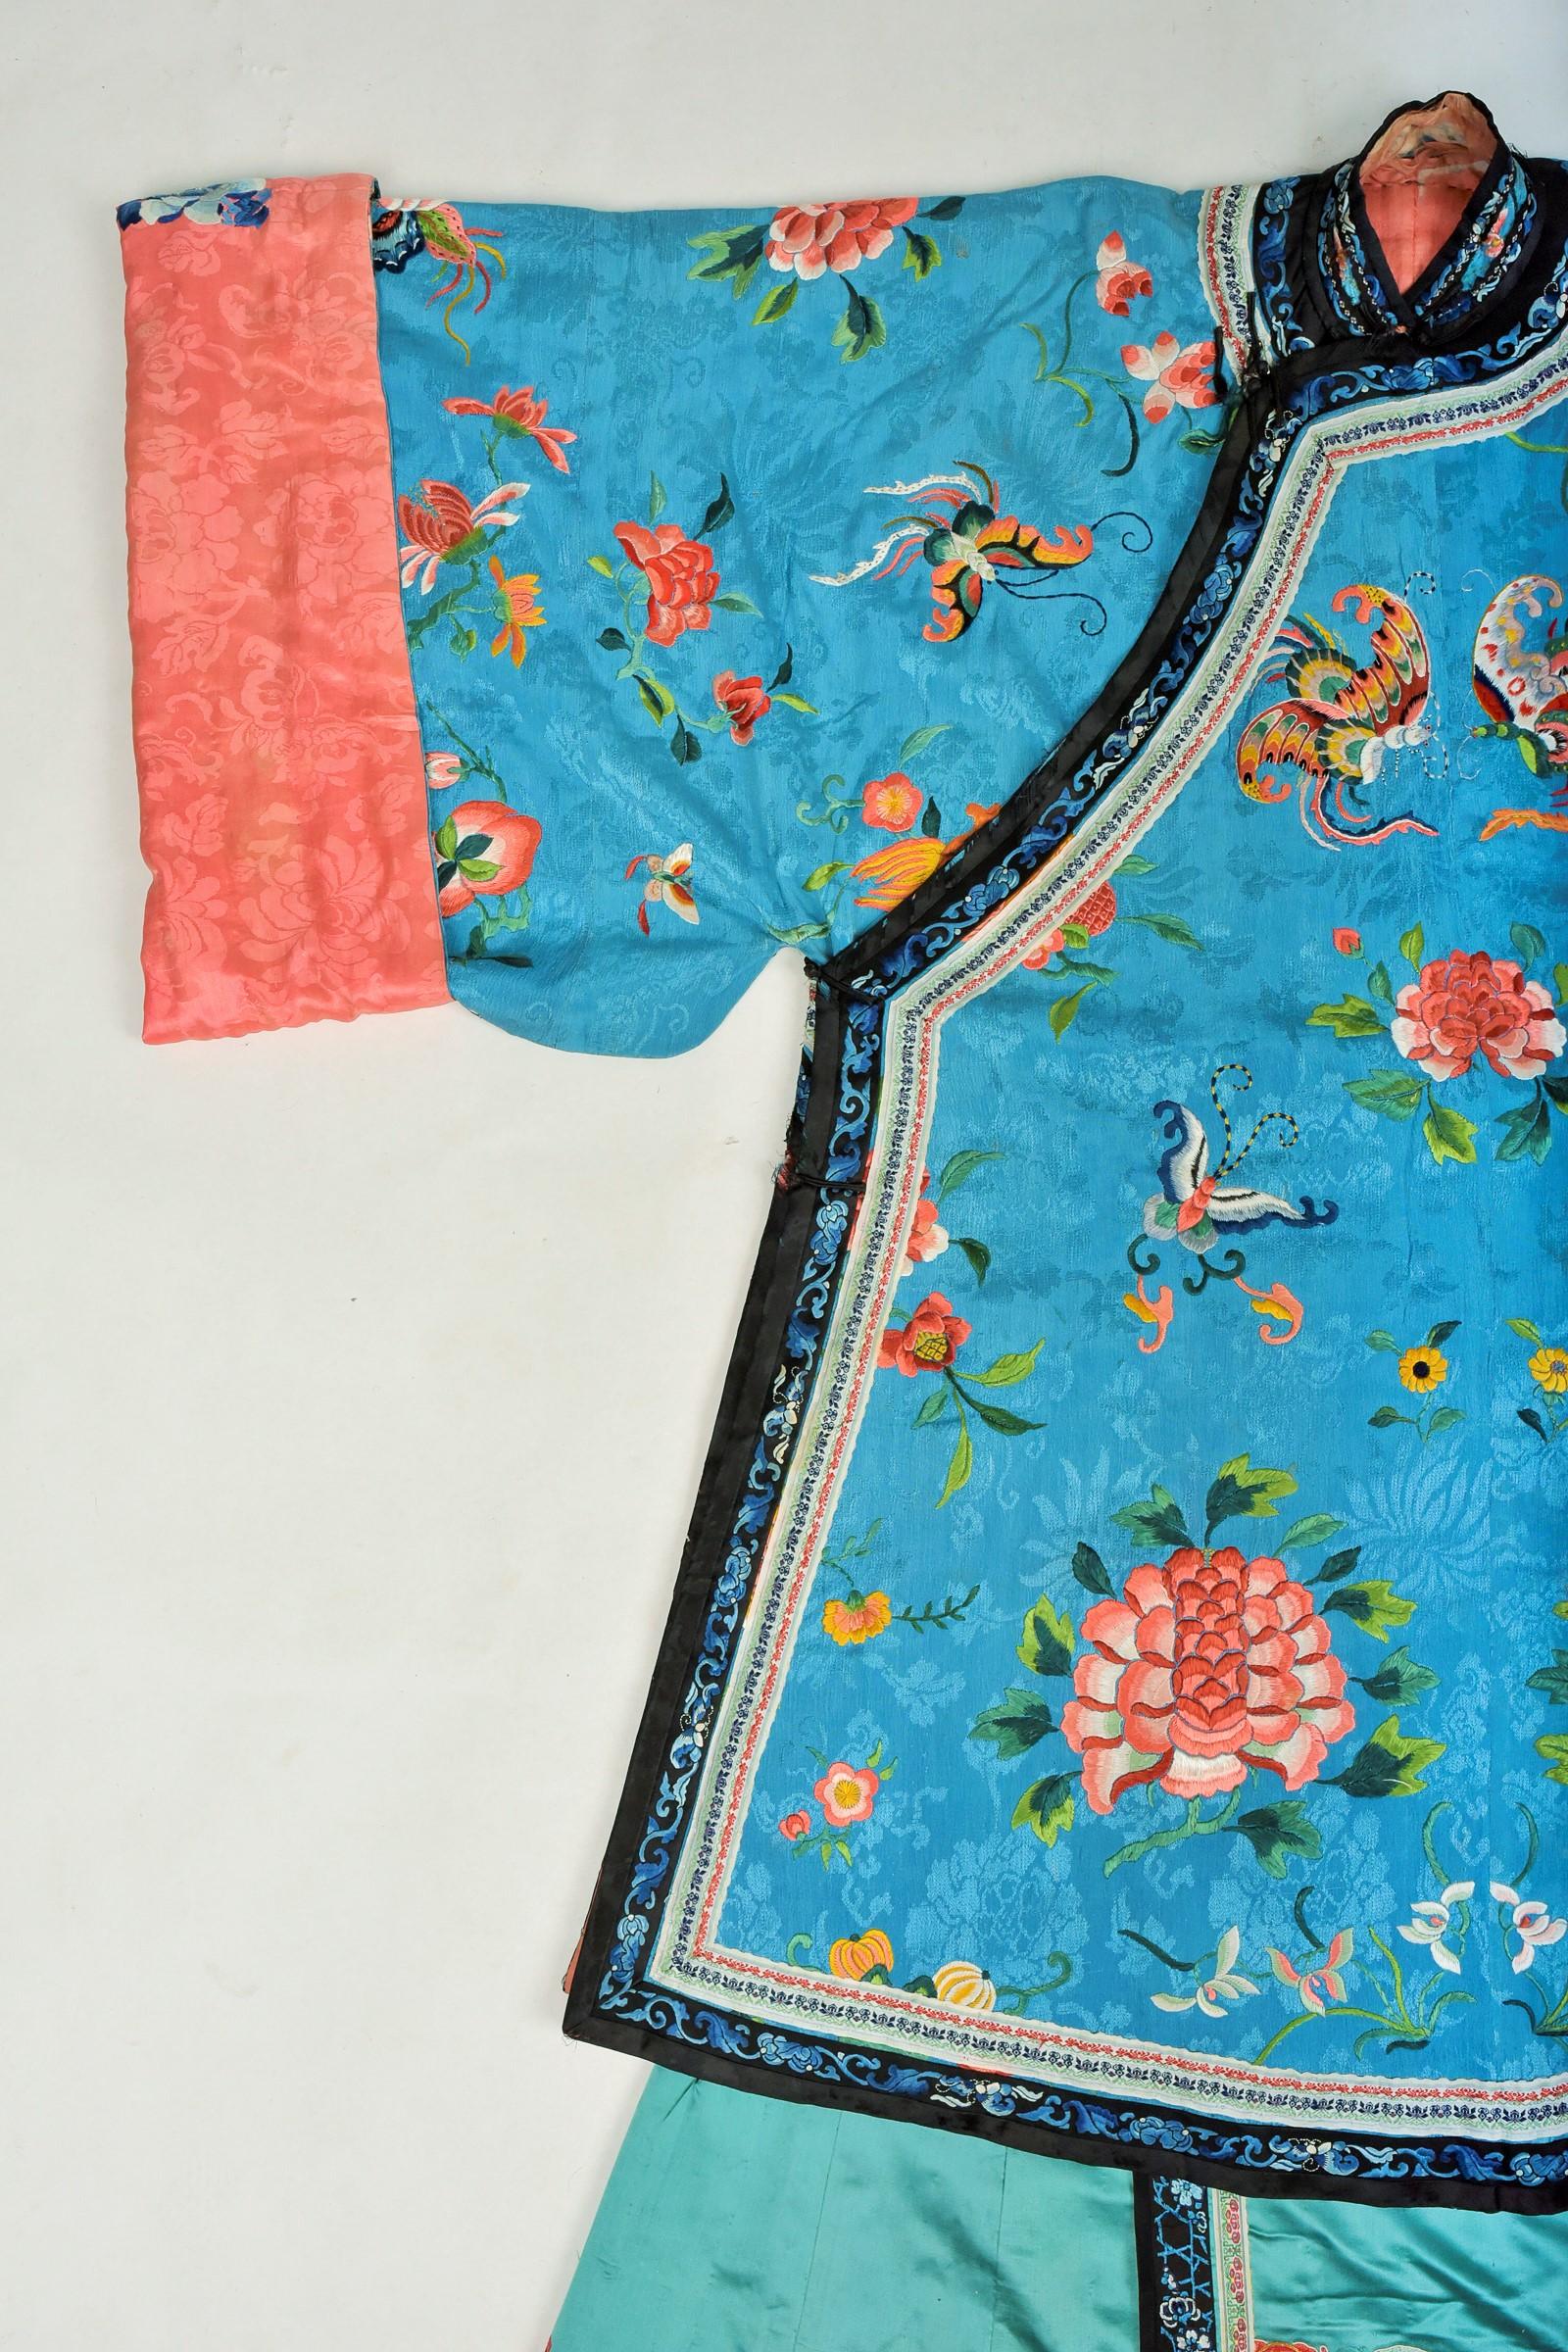 Blue Semi Formal Silk Embroidered Manchu Woman's Skirt and Dress Qing period C.1900